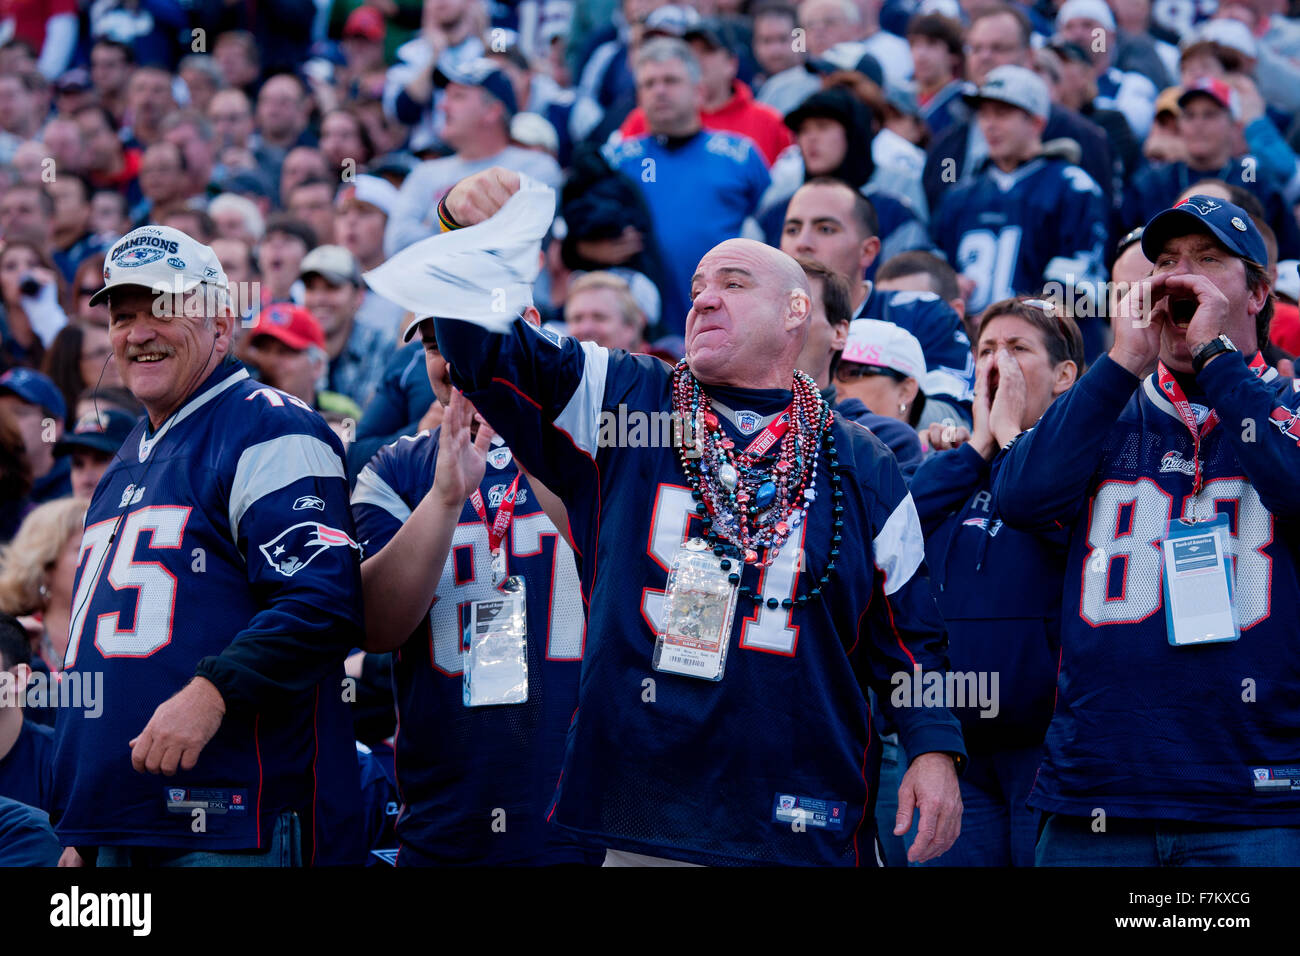 New England Patriots NFL Football fans at Gillette Stadium, the home of Super Bowl champs, New England Patriots vs. the Dallas Cowboys, October 16, 2011, Foxborough, Boston, MA Stock Photo